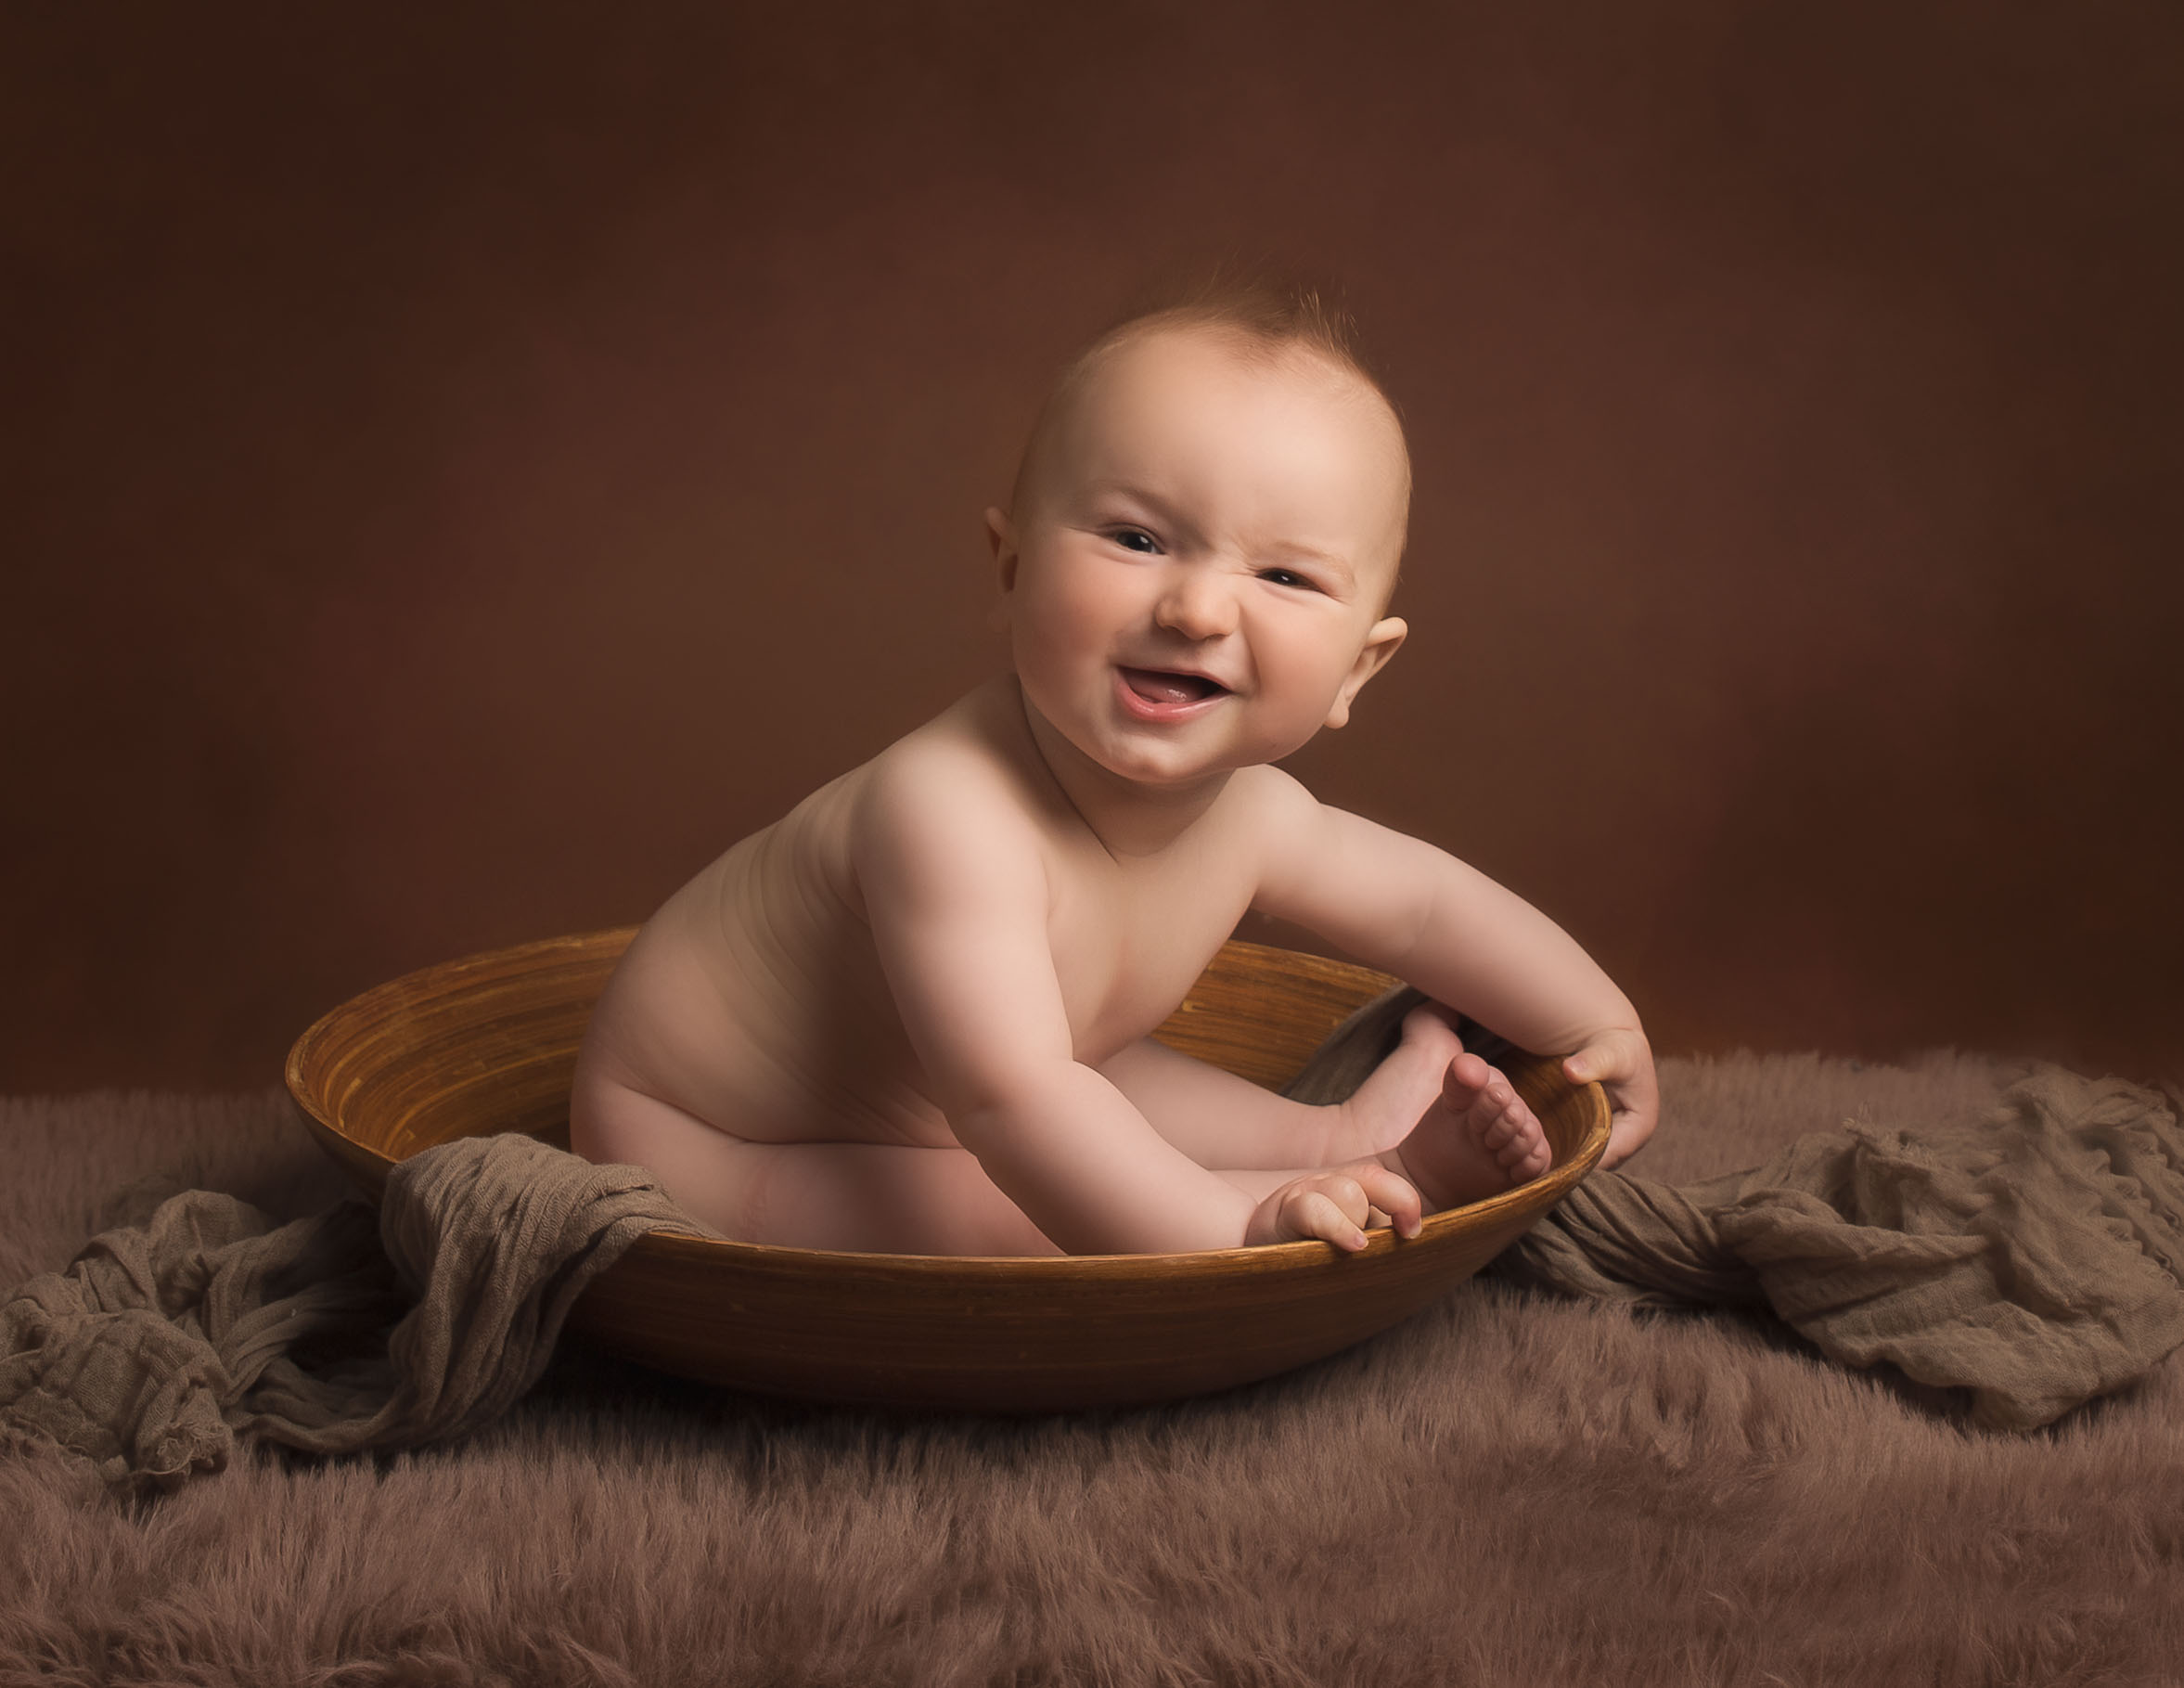 6 month old Baby Boy satin round wooden bowl smiling